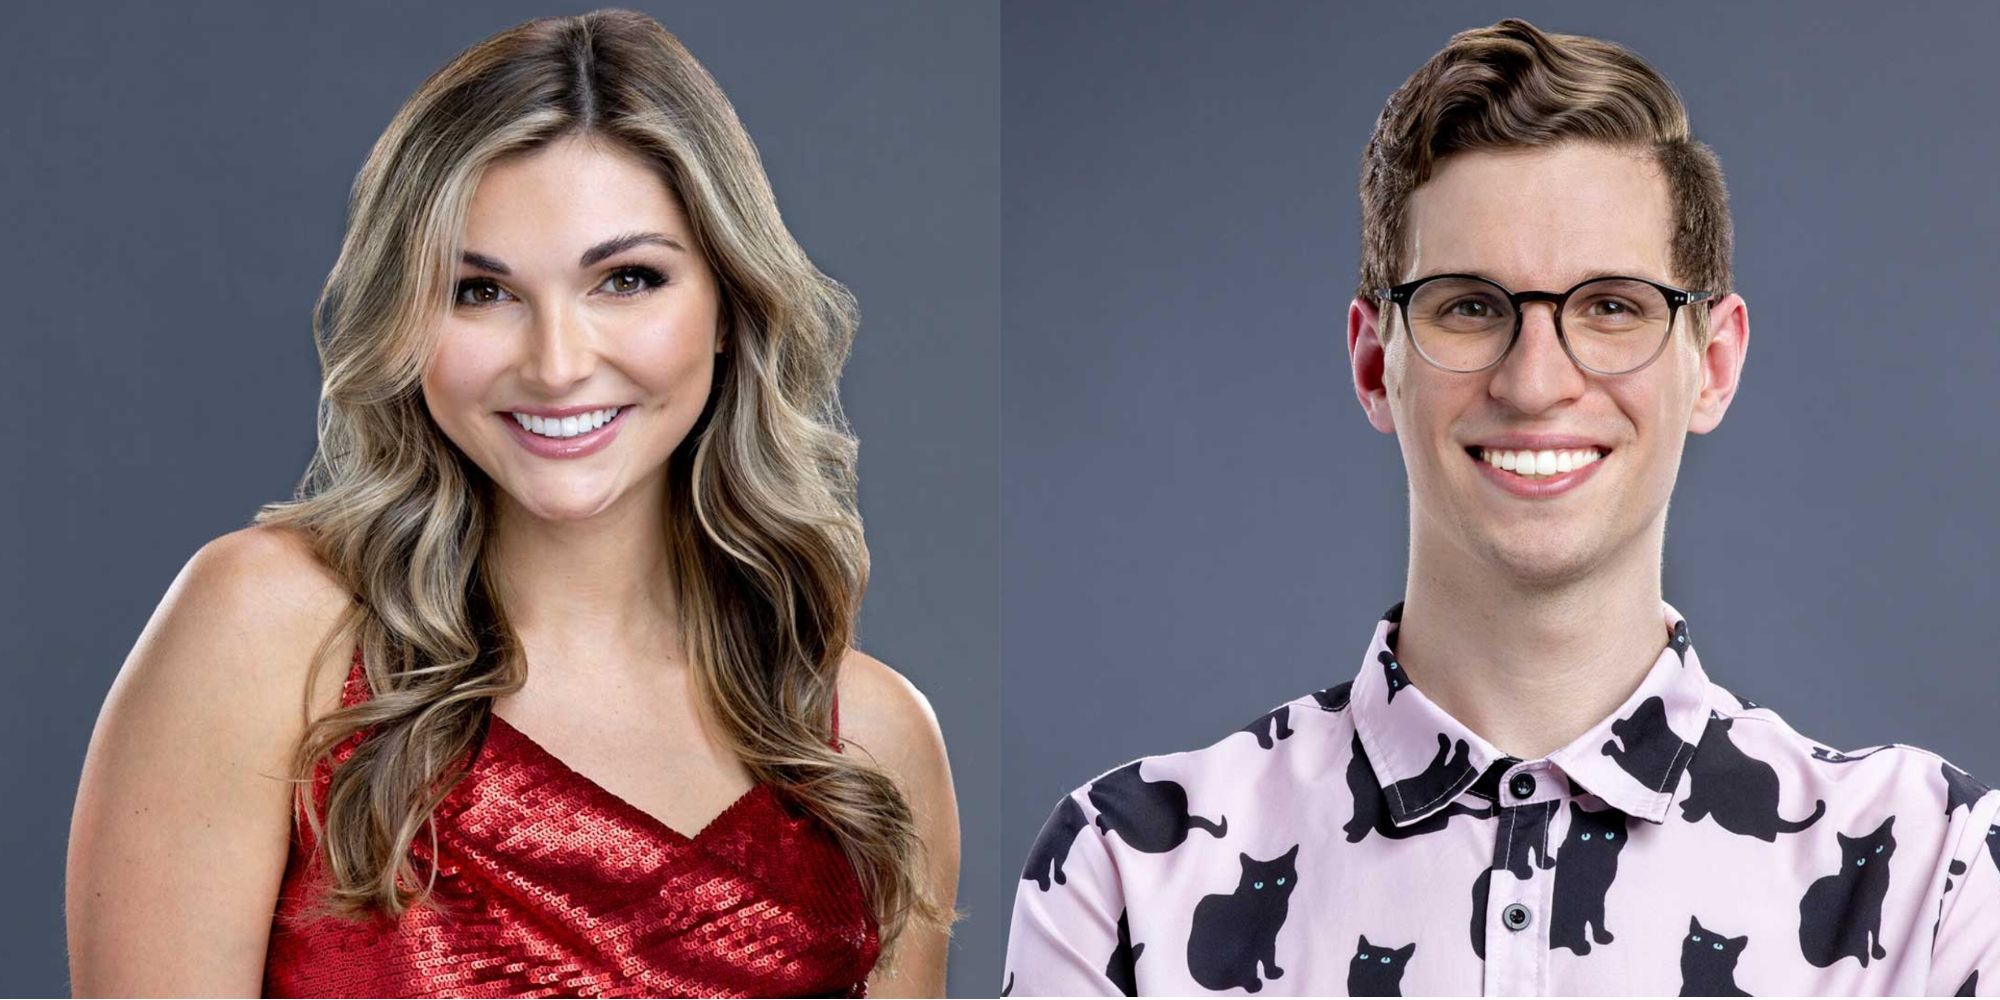 Read Big Brother 24 Cast Members, Ranked By Least To Most Likely To Win